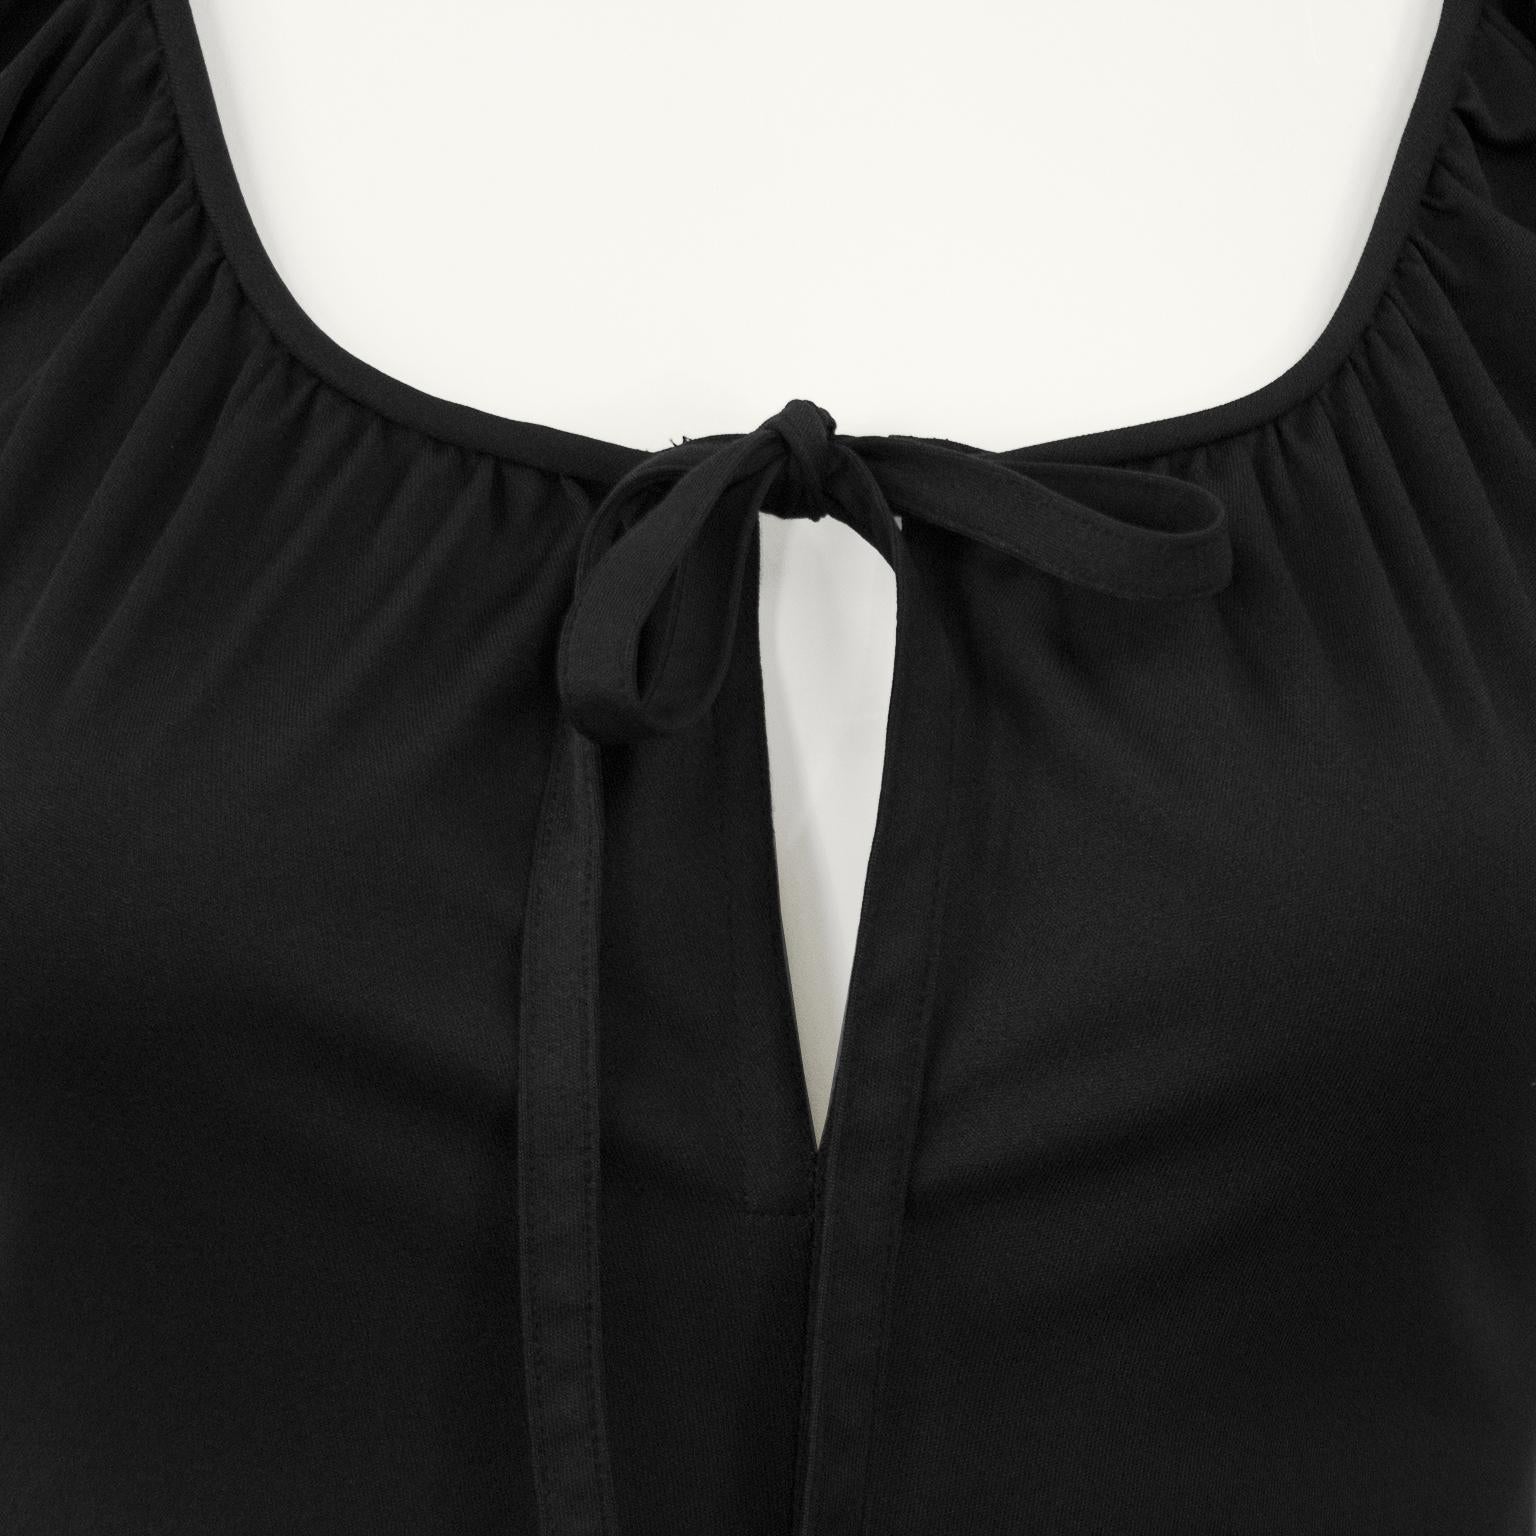 1970s Clovis Ruffin Black Keyhole Dress In Excellent Condition For Sale In Toronto, Ontario